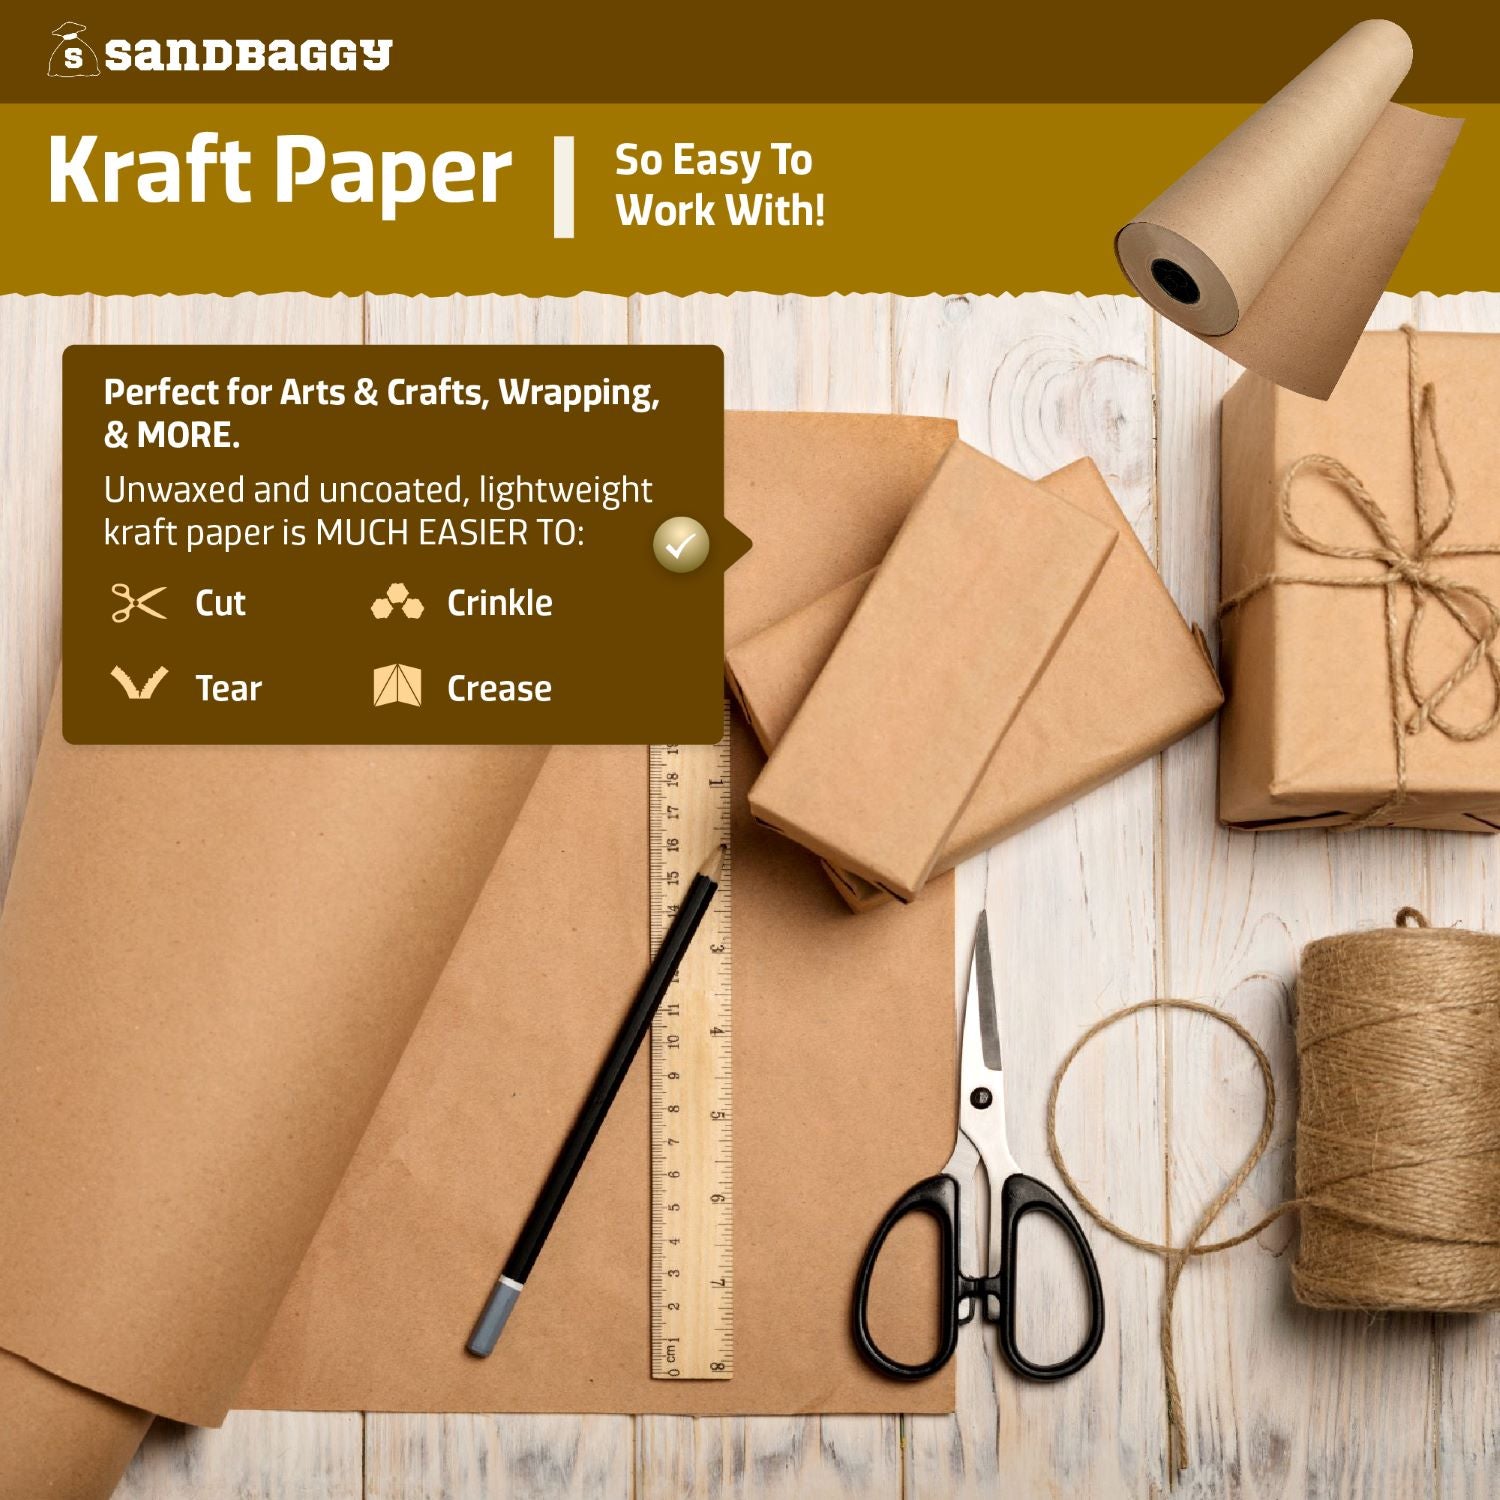 Kraft Paper Converting Services, Kraft Paper Rolls and Sheets